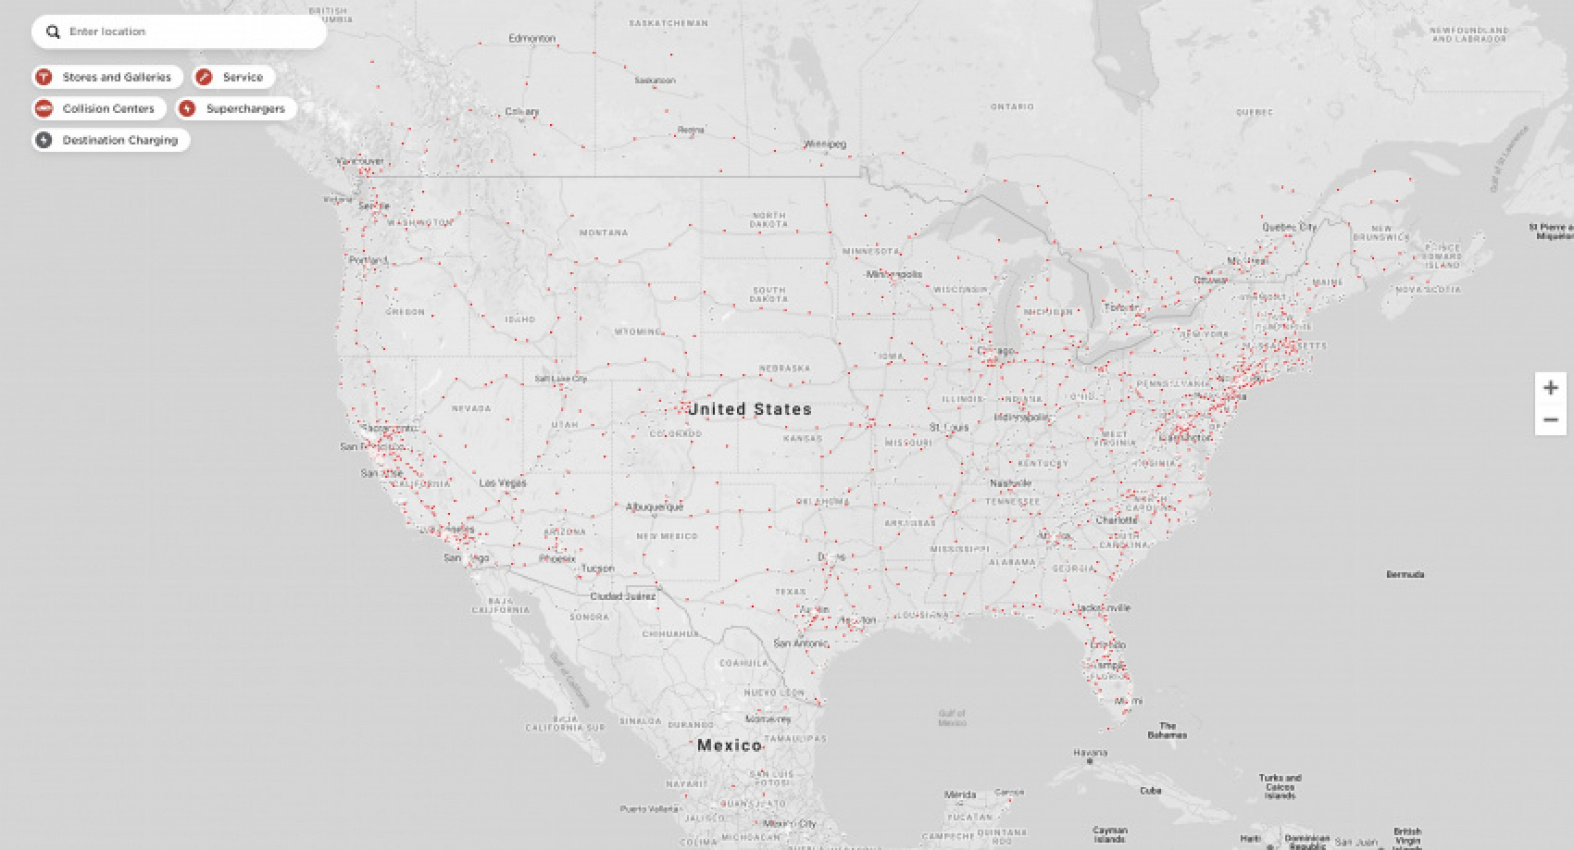 how to, tesla, cars, how-to, how to, tesla supercharger map: how to find a tesla supercharger